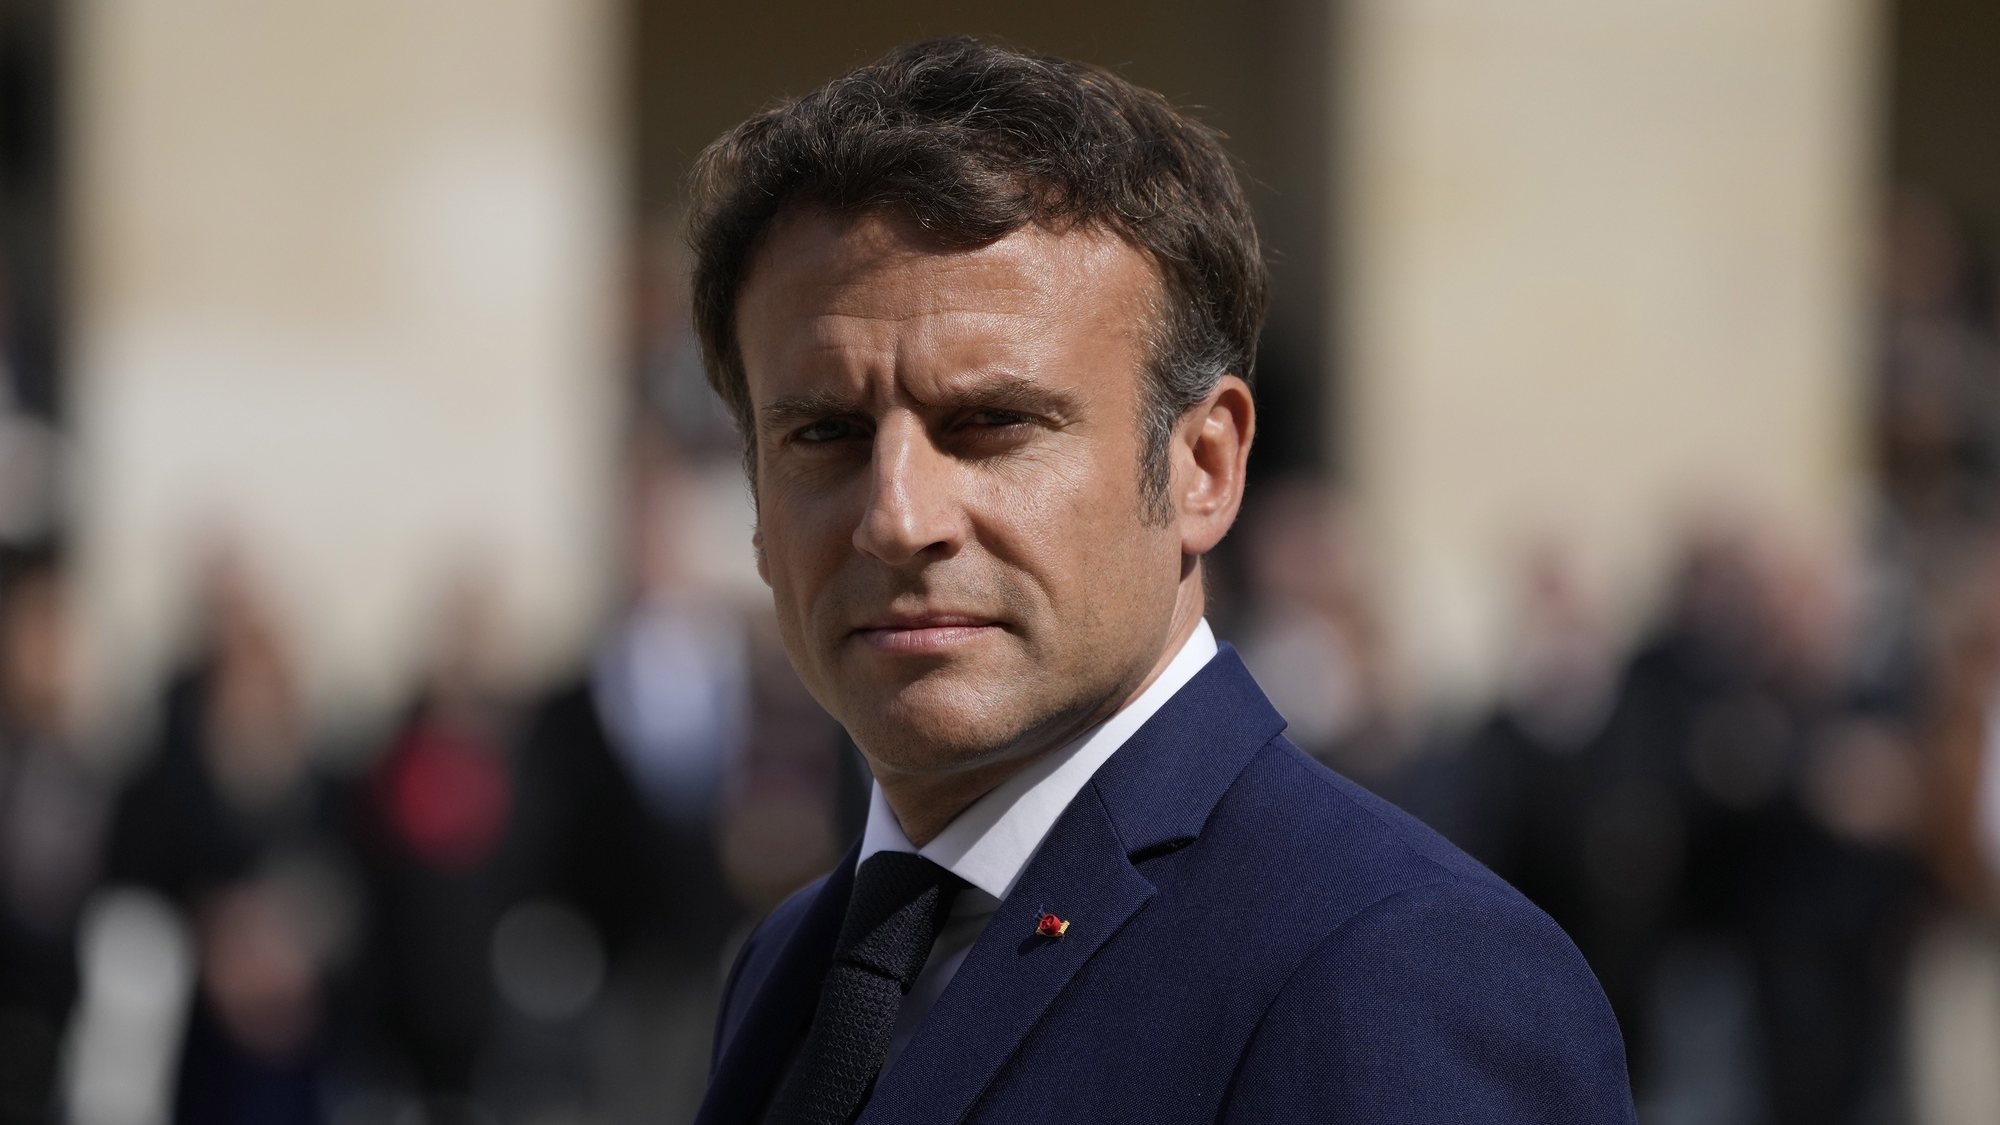 epa09912293 French President Emmanuel Macron attends a national homage to late French actor Michel Bouquet at Les Invalides monument in Paris, France, 27 April 2022. French stage and film actor Michel Bouquet died on 13 April aged 96.  EPA/Francois Mori / POOL MAXPPP OUT